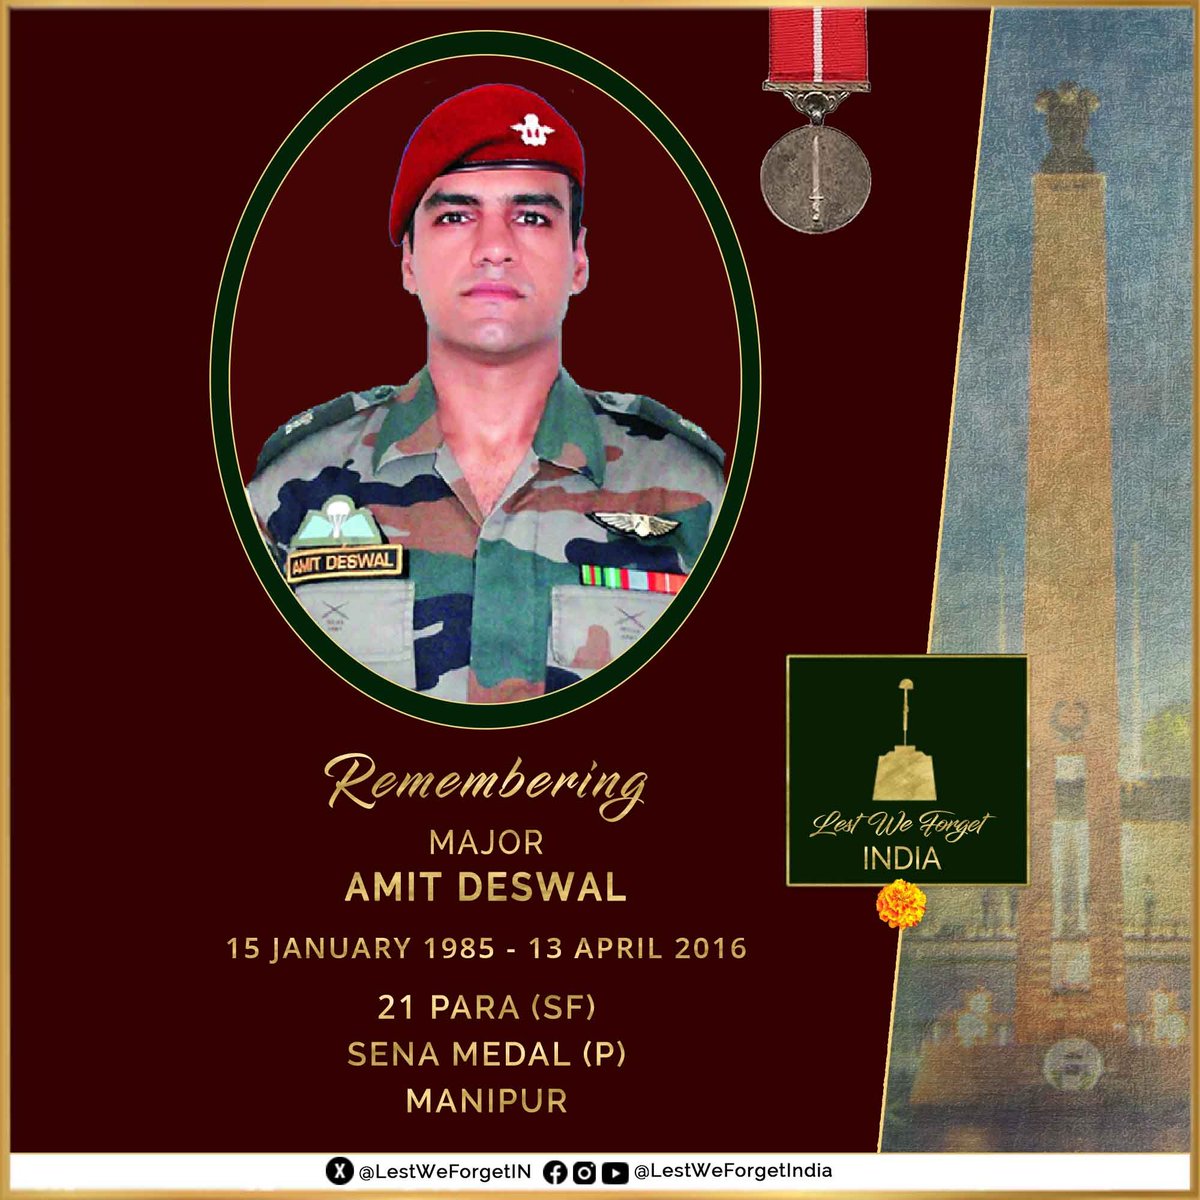 #LestWeForgetIndia🇮🇳 Major Amit Deswal, #SenaMedal (P), 21 PARA (SF), the gallant #IndianBrave Commando made the supreme sacrifice #OnThisDay 13 April in 2016, fighting militants in Manipur. Remember his service and gallantry serving the Nation always 🏵️ @easterncomd